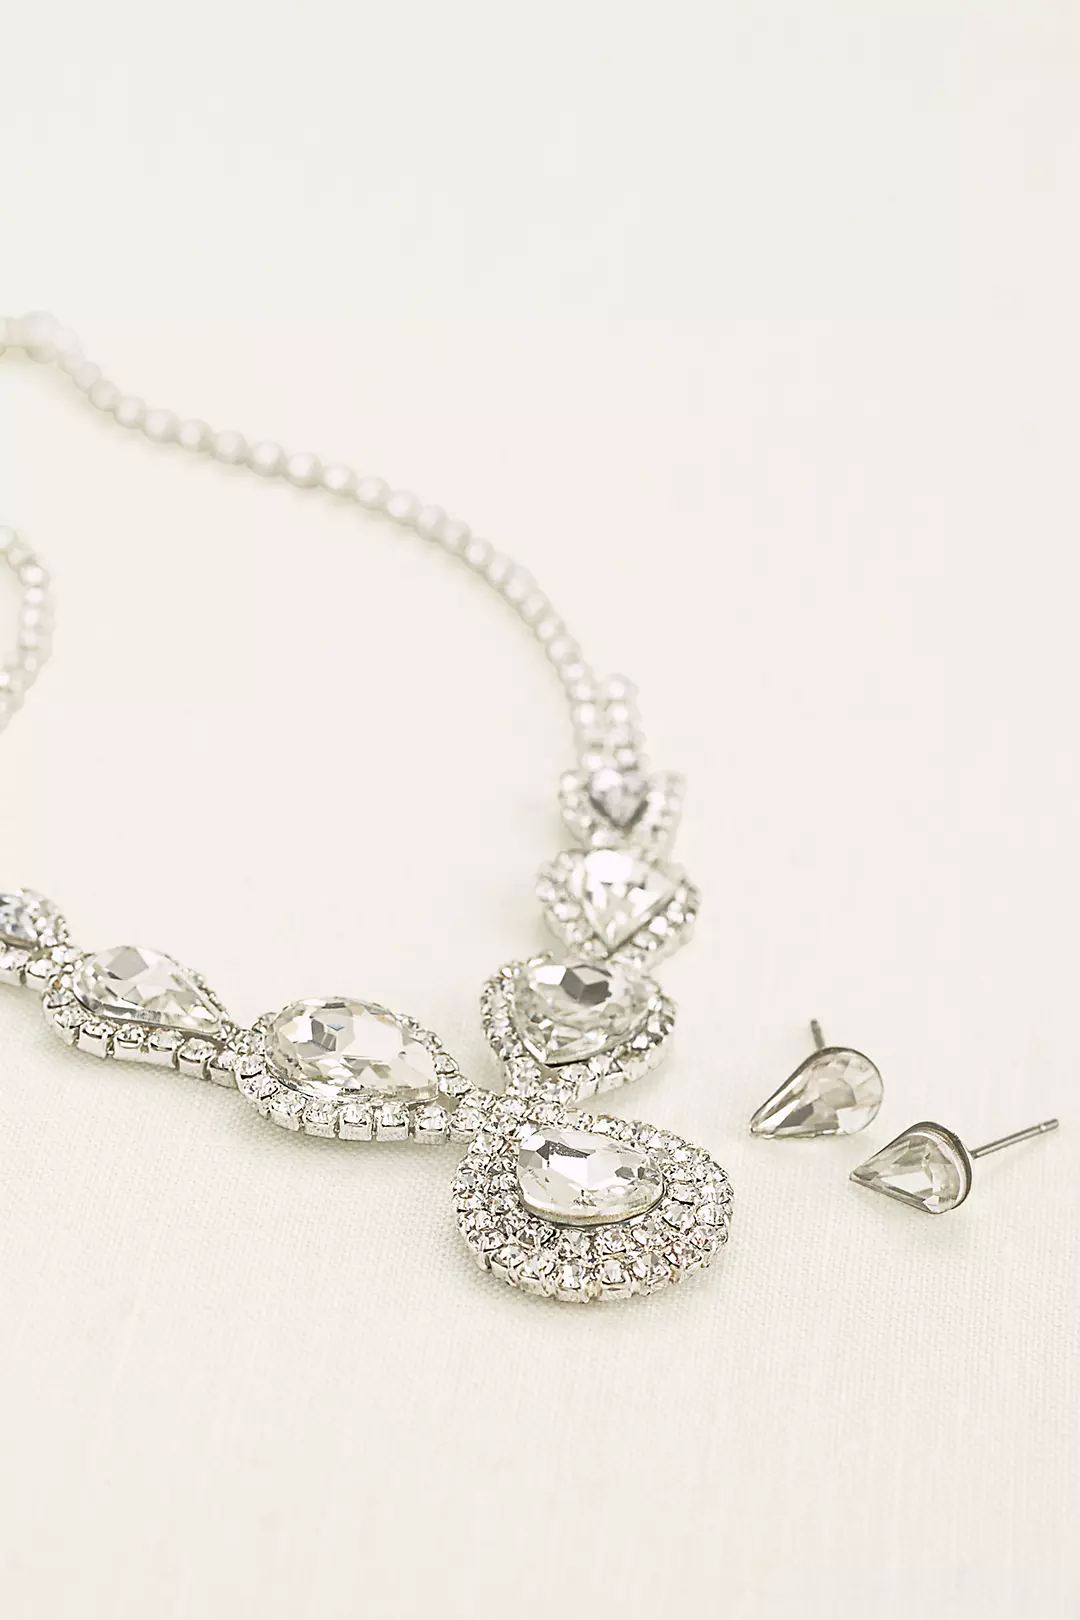 Pear and Pave Rhinestone Necklace and Earring Set Image